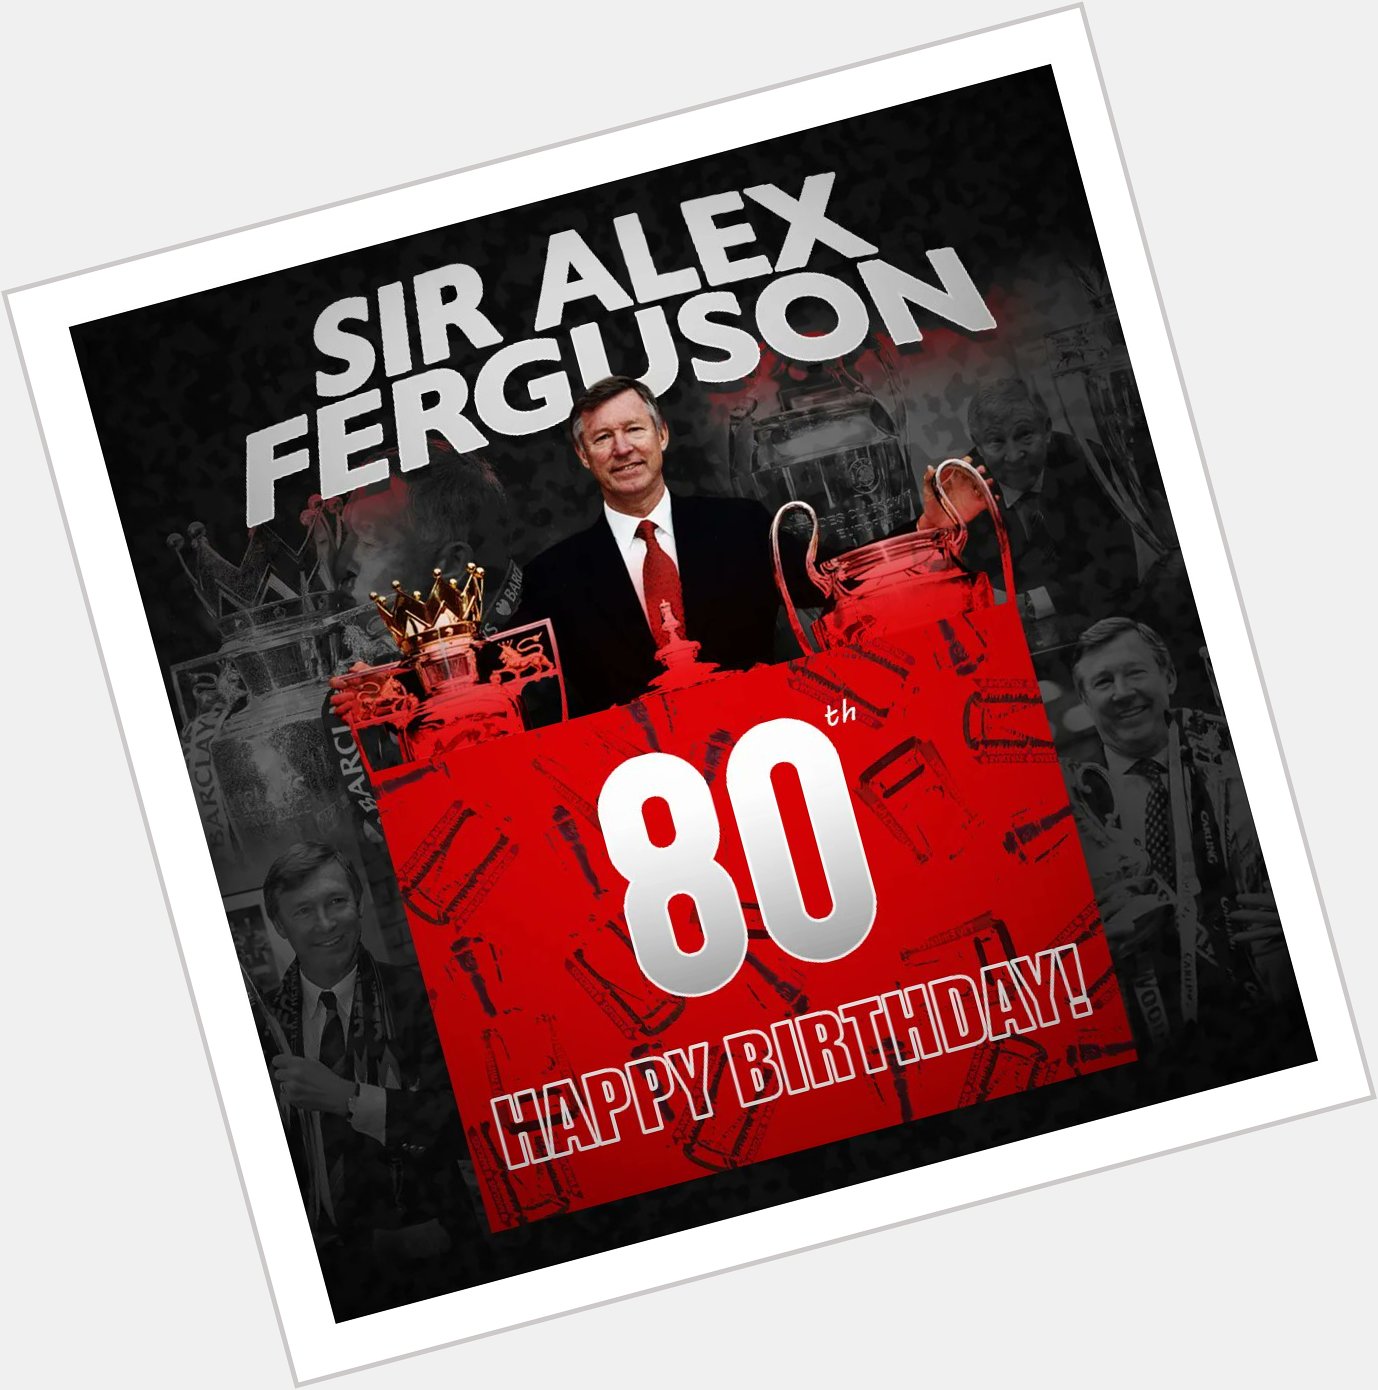 HAPPY 80th BIRTHDAY! Happy Birthday to the greatest manager of all time - Sir Alex Ferguson 